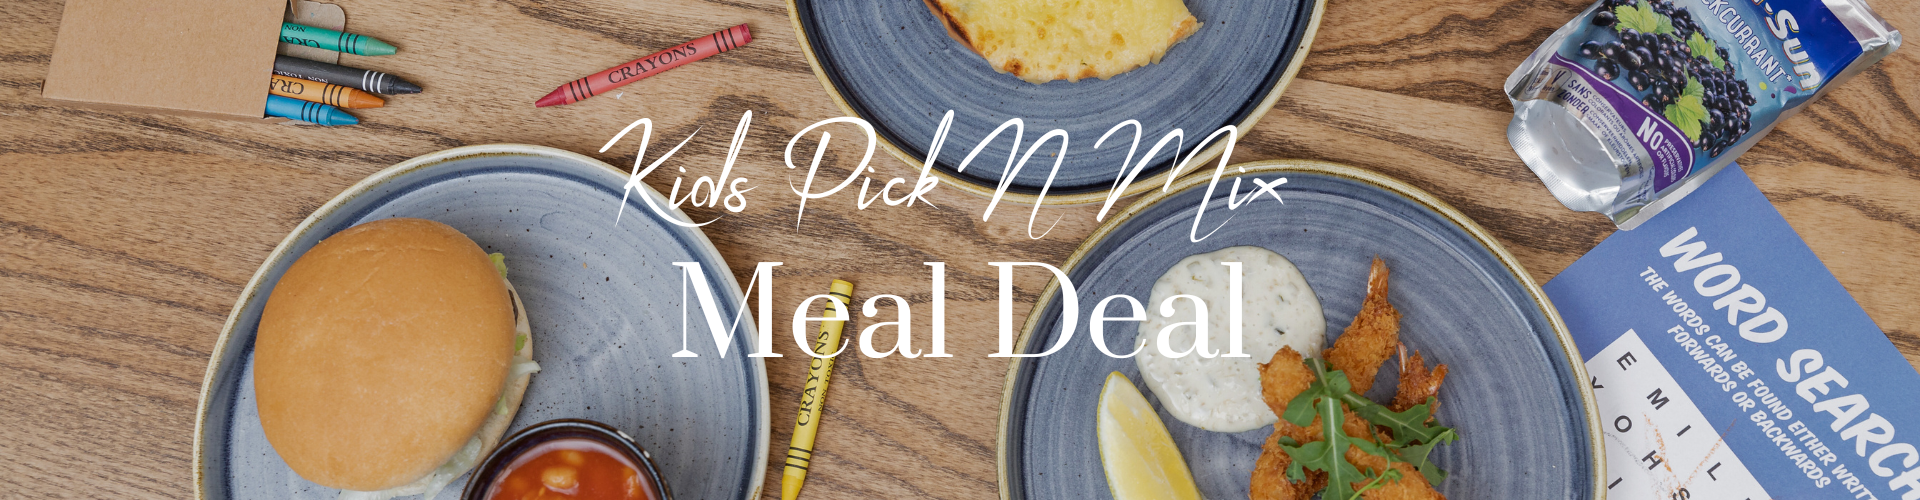 Kids Meal Deal available at The Bell